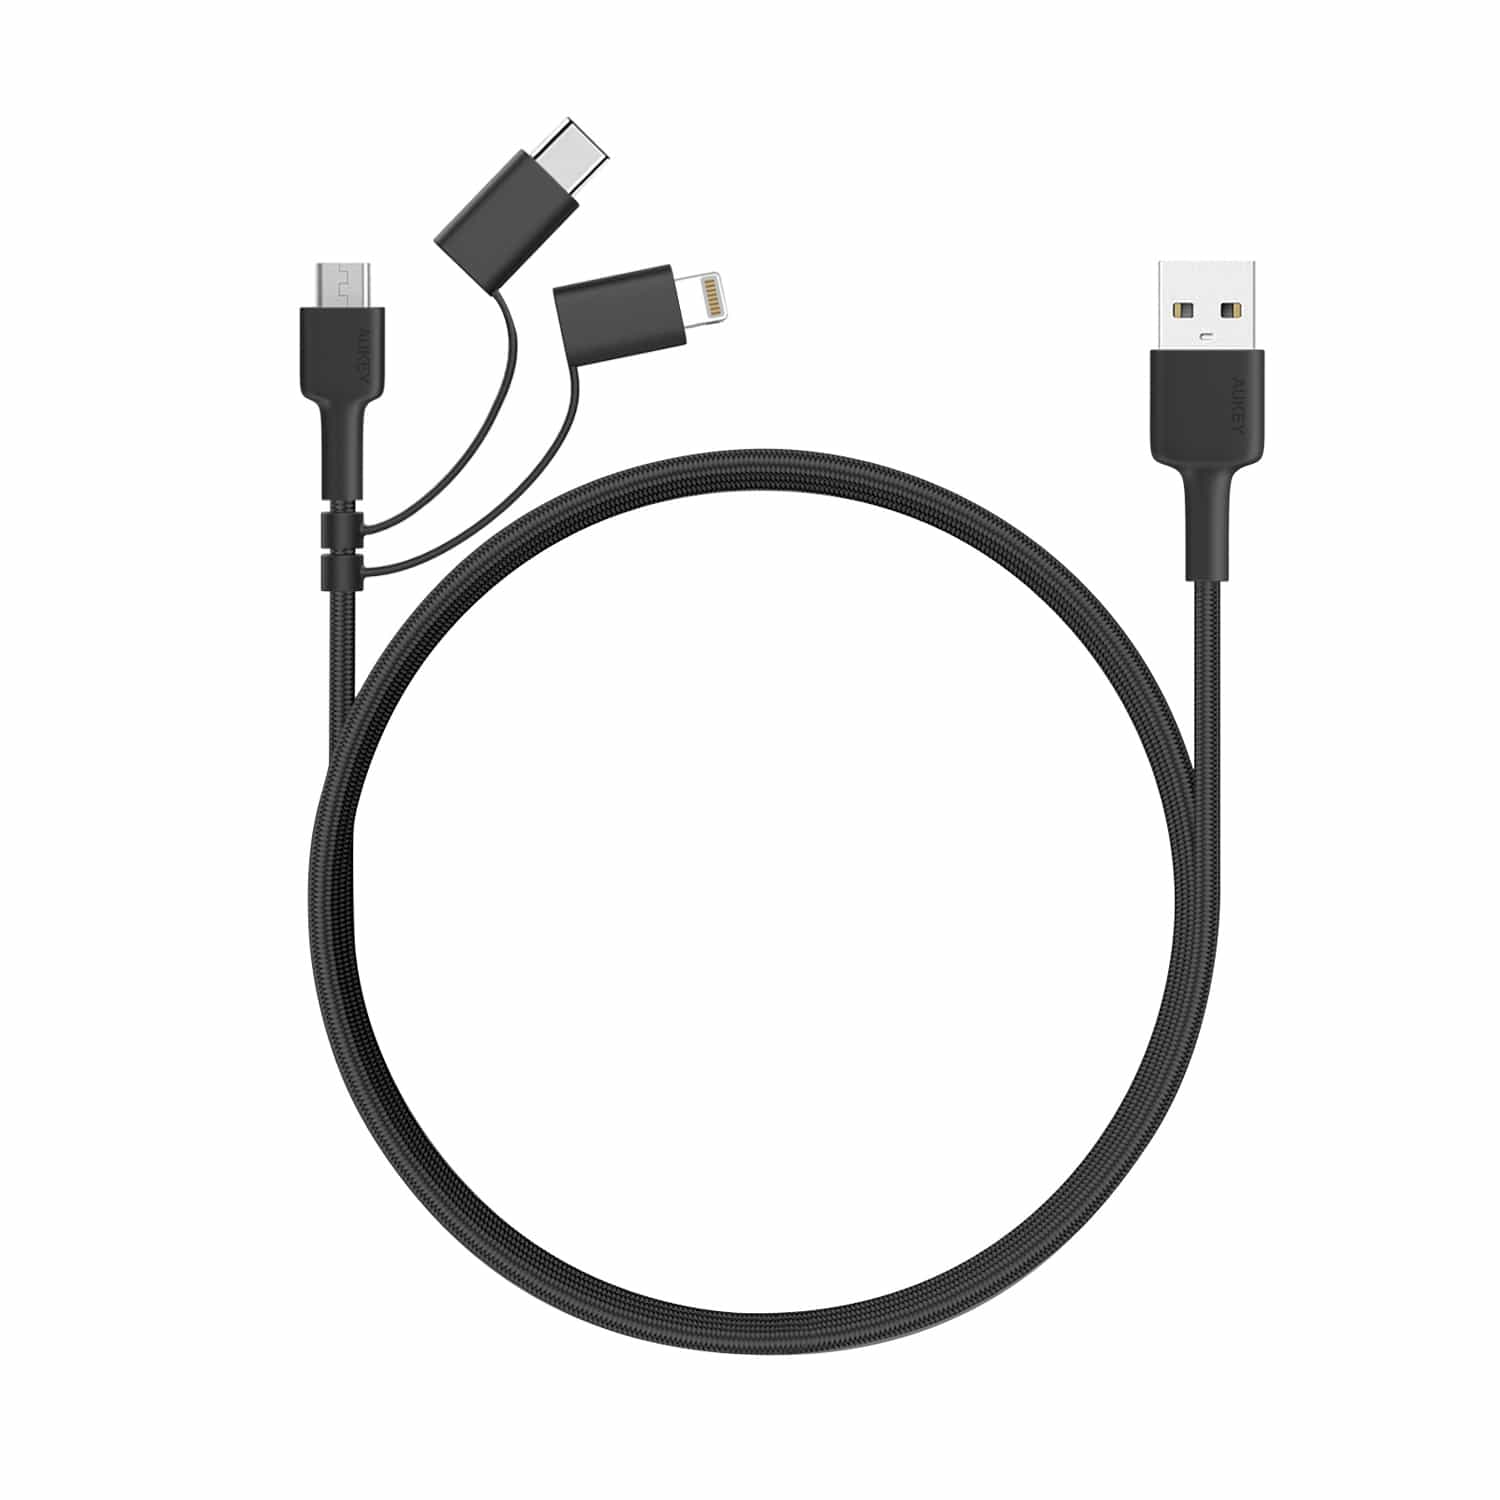 CB-BAL5 3 In 1 MFI Lightning Cable With Micro USB & USB C Cable